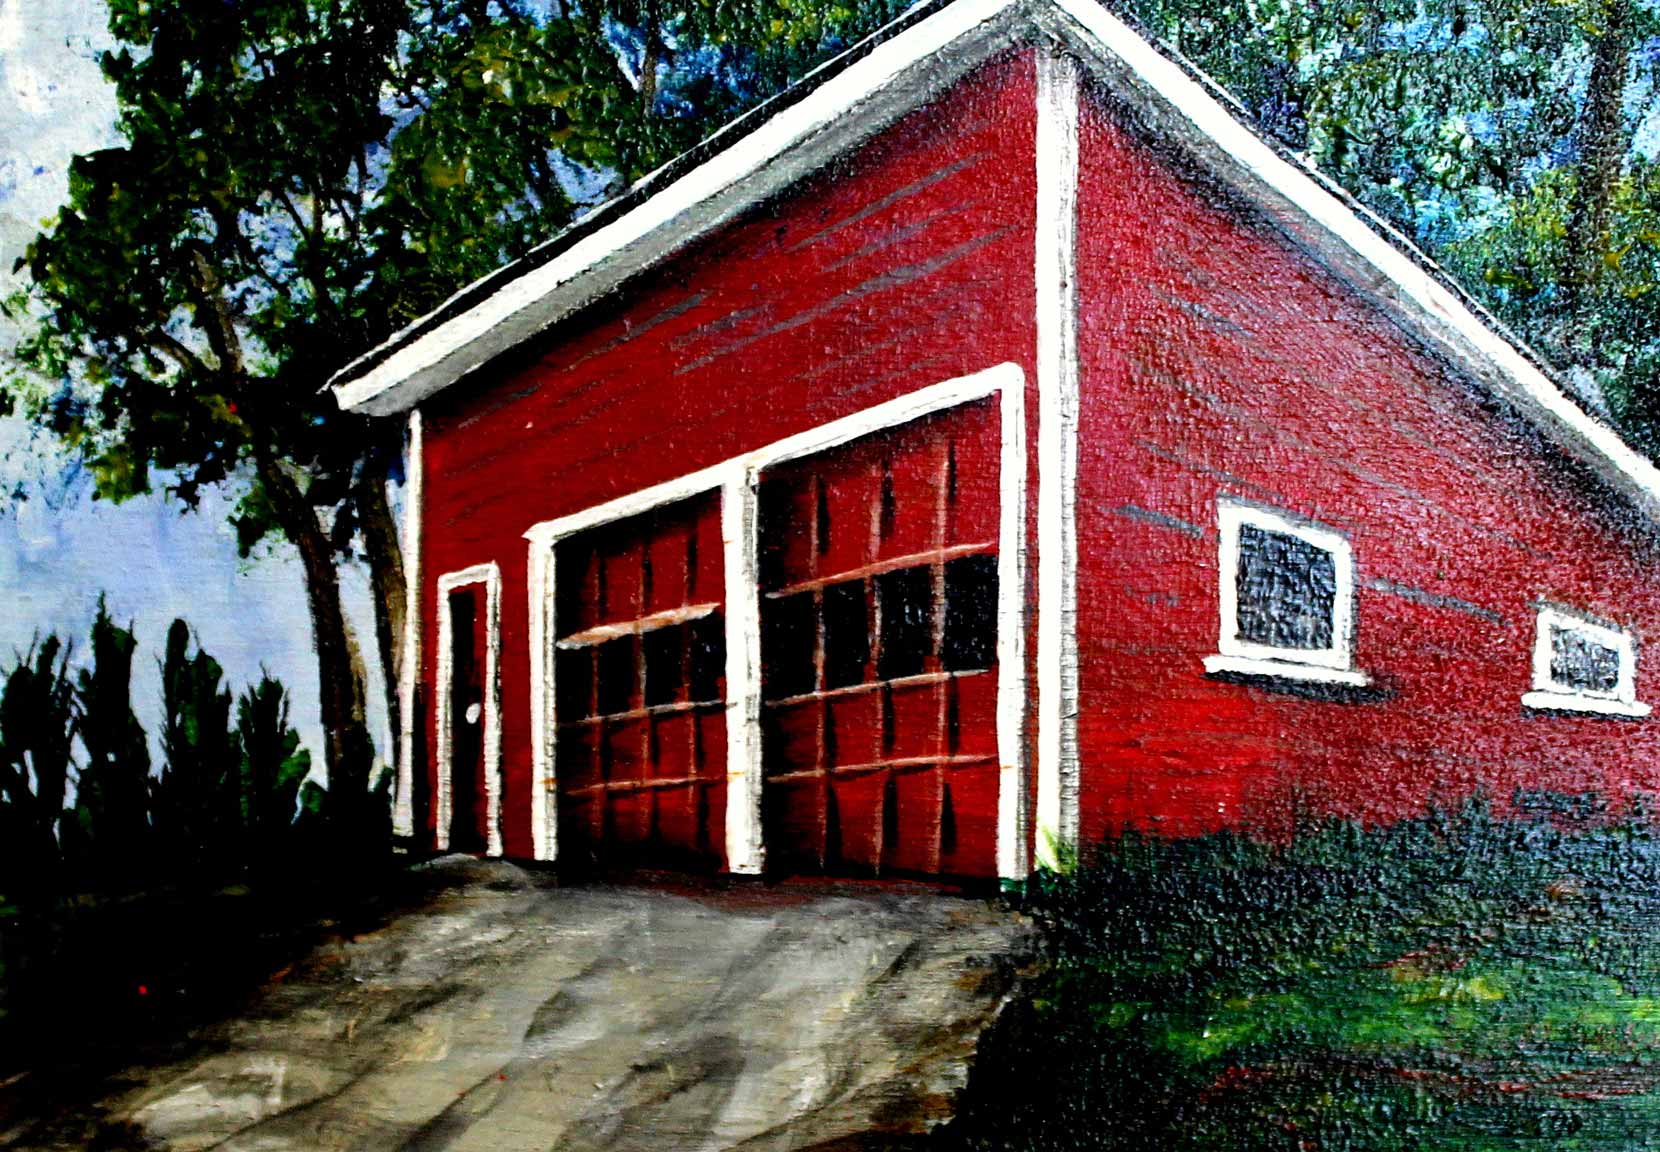 "Old Fire Hall", Ontario, 10x8